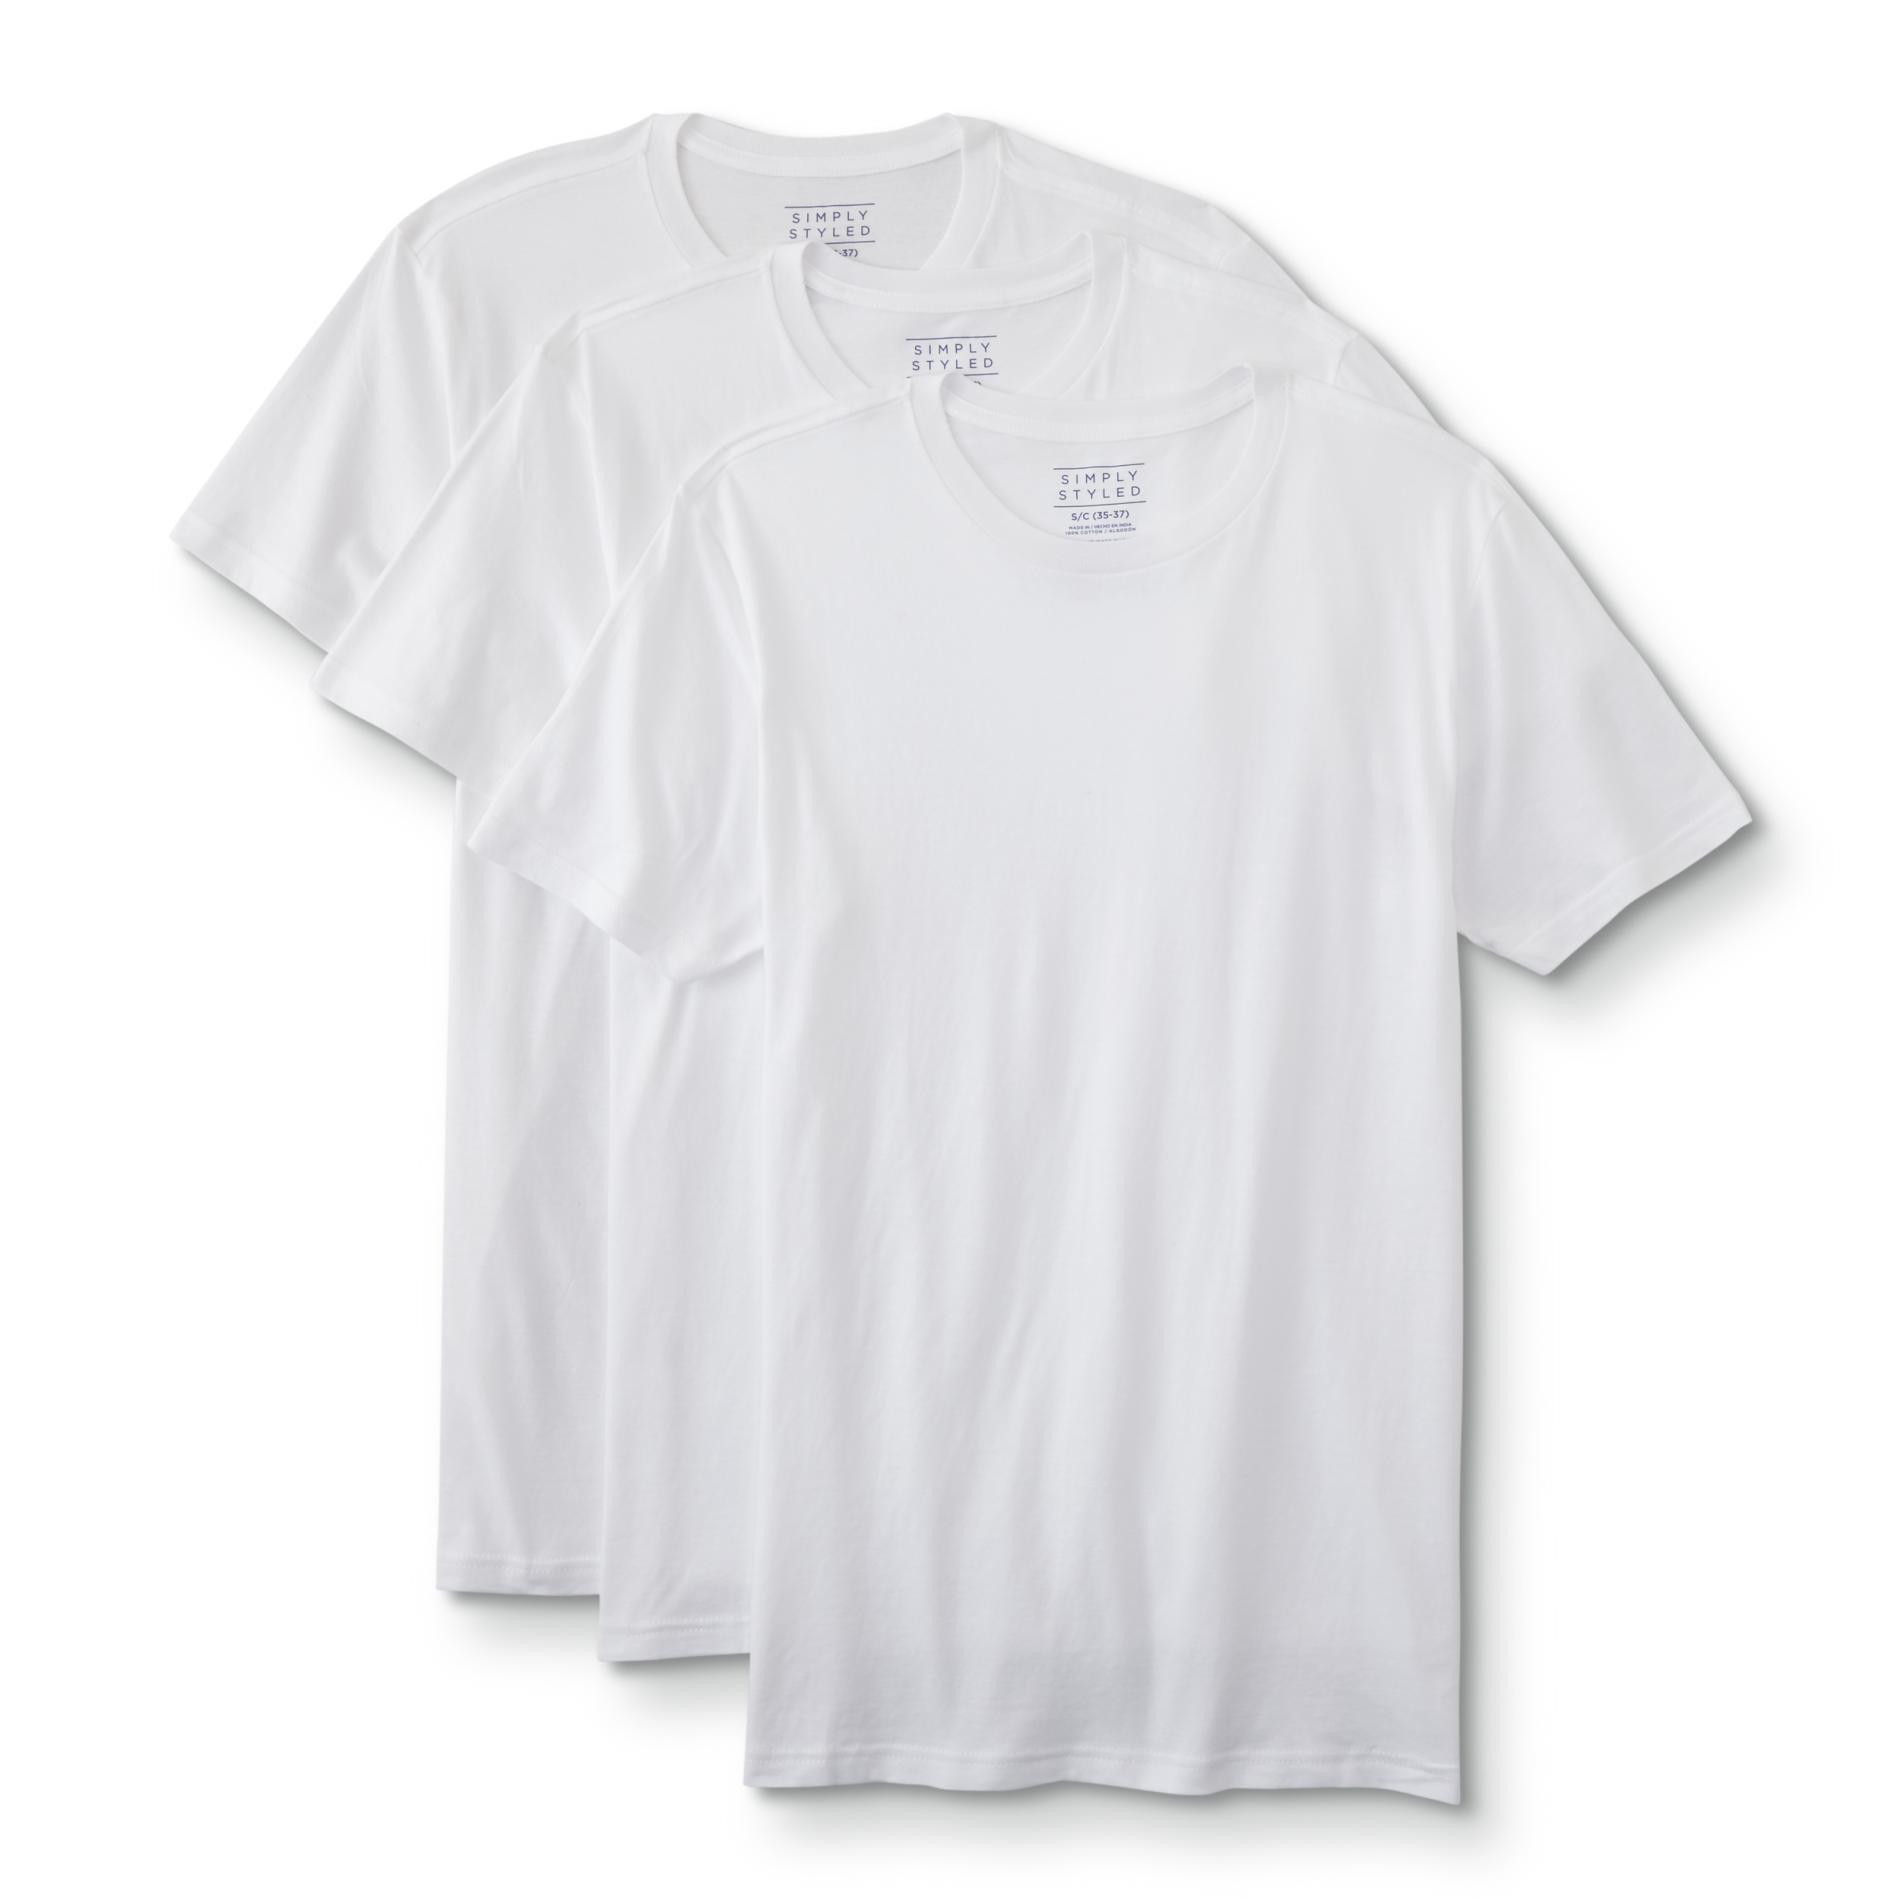 Simply Styled Men's 3-Pack Crew Neck T-Shirts